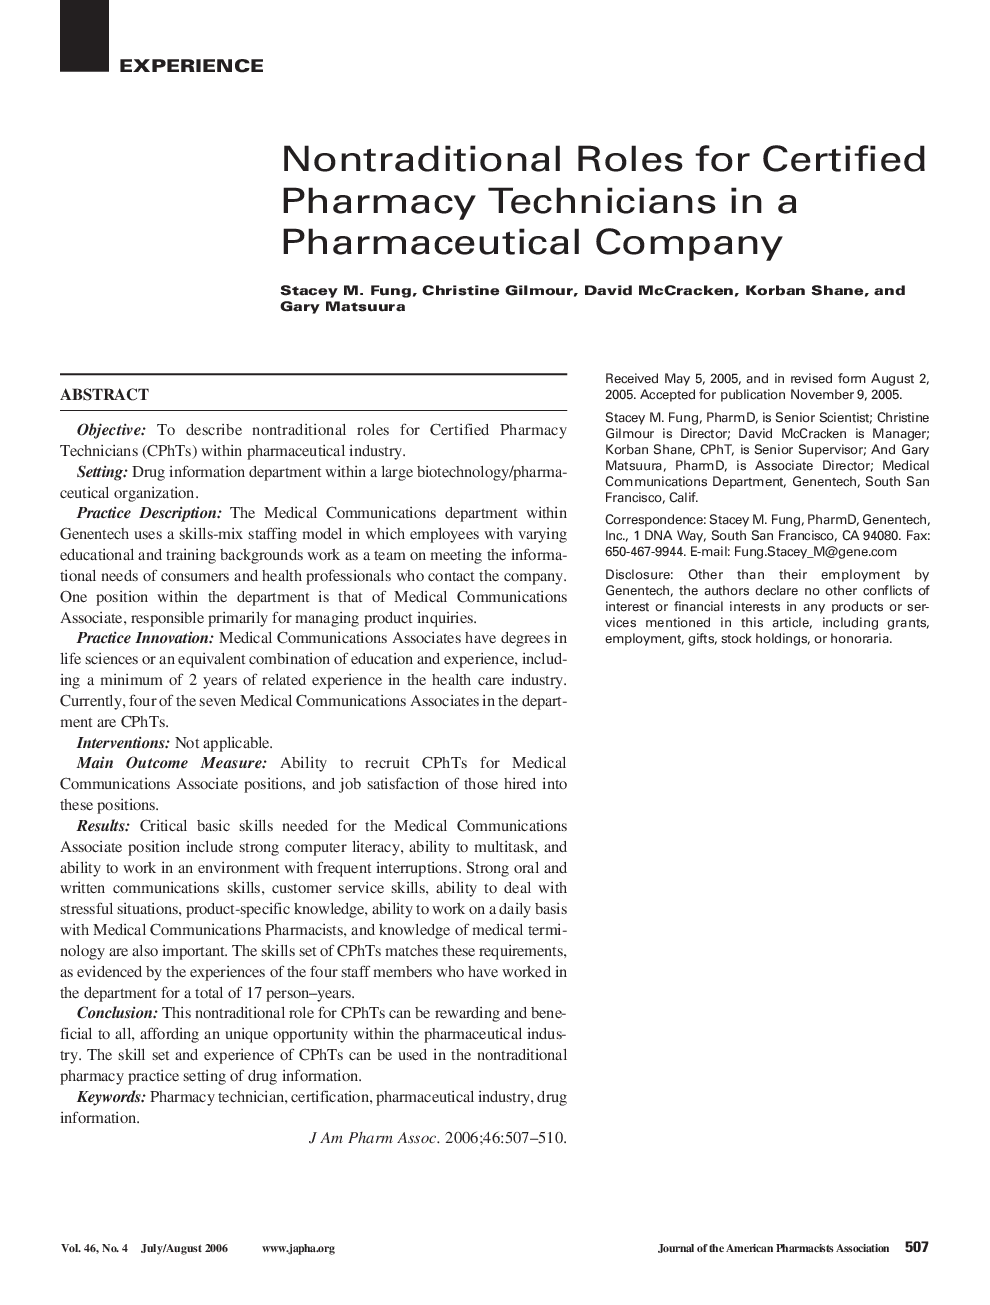 Nontraditional Roles for Certified Pharmacy Technicians in a Pharmaceutical Company